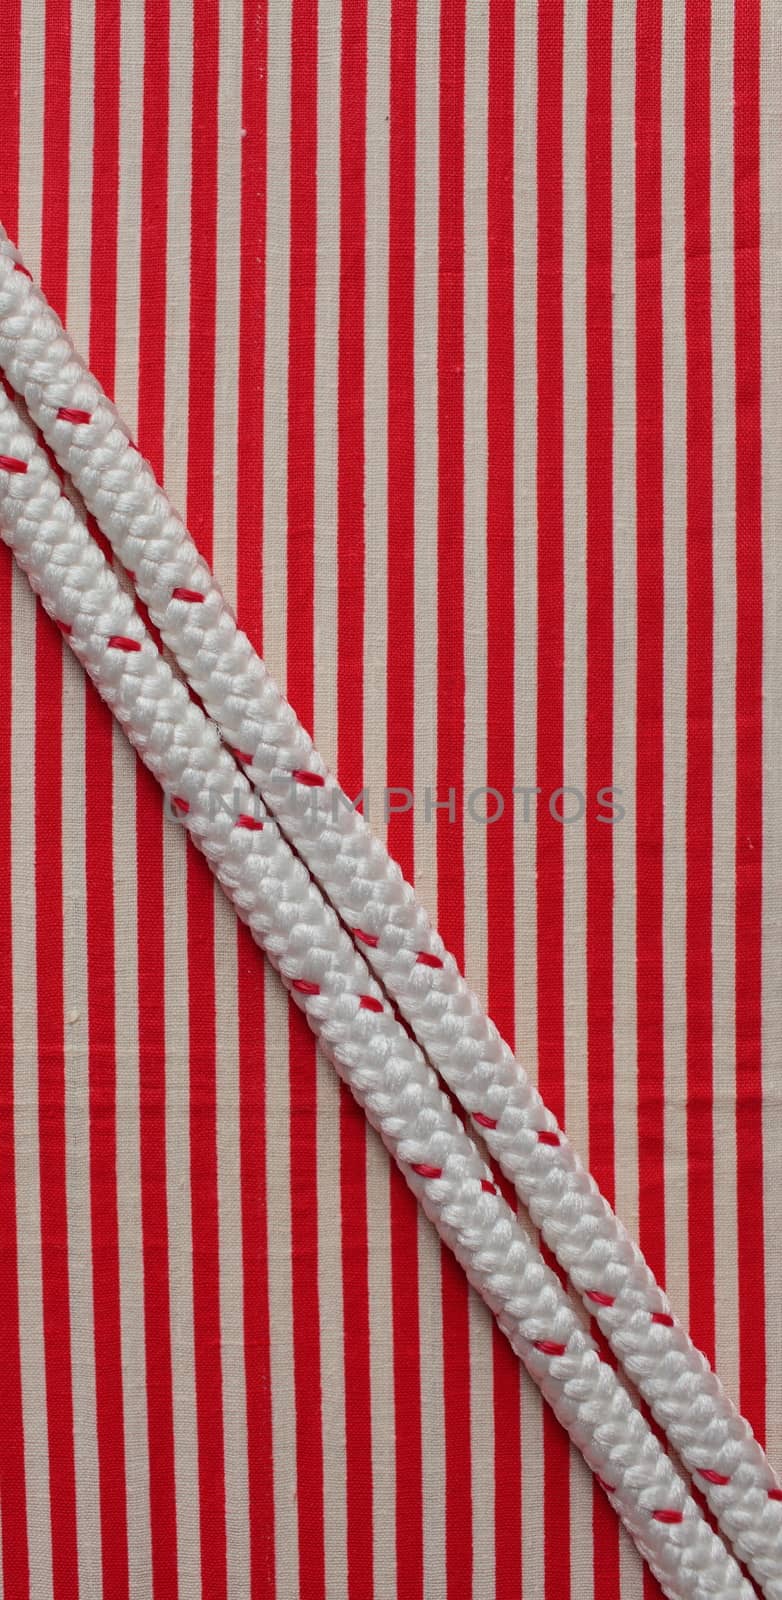 durable rope red striped  flat lay 